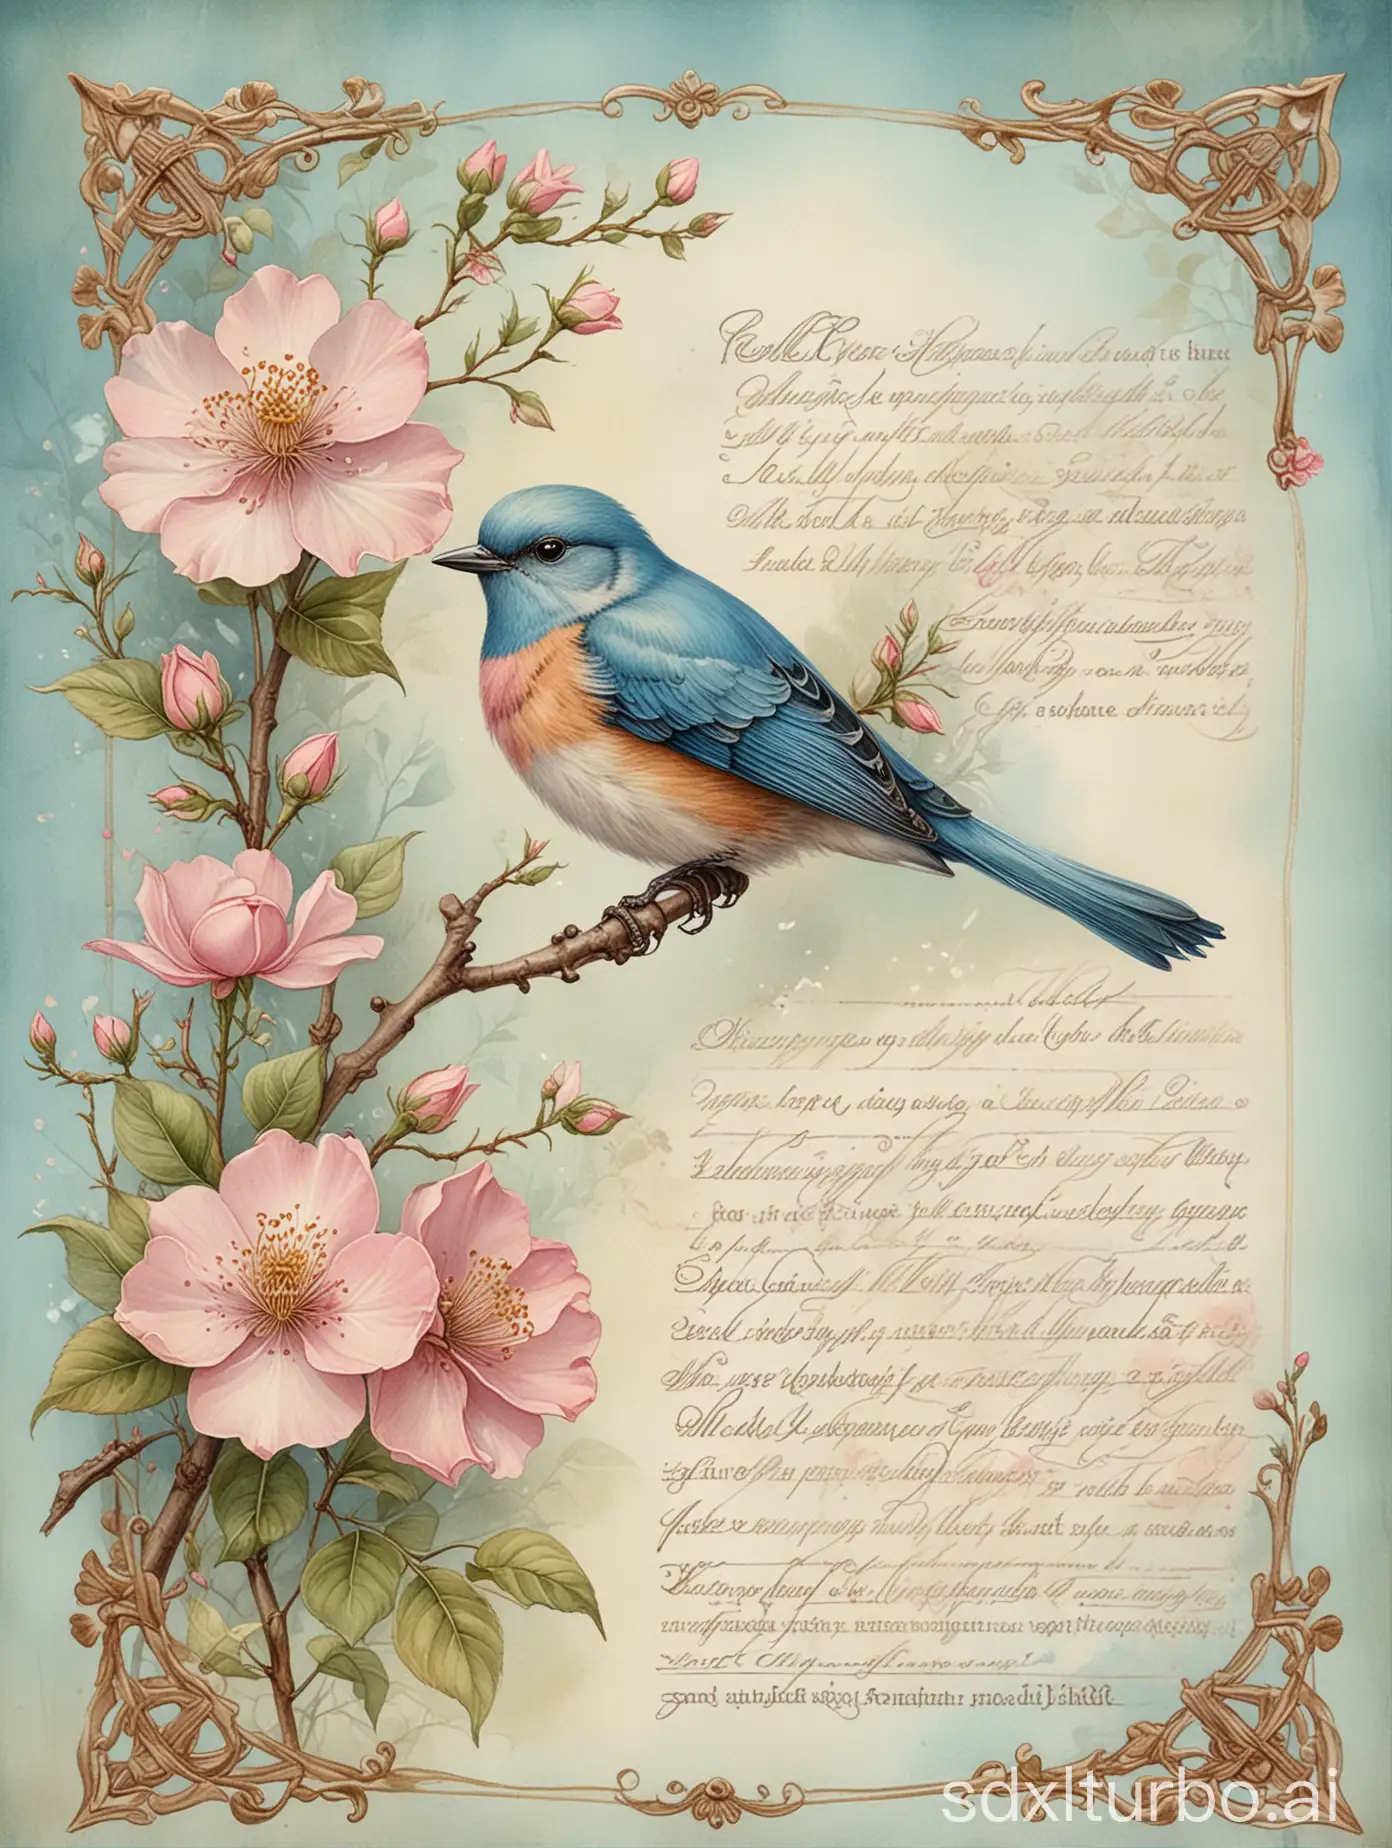 Vintage-Love-Letter-with-Handwritten-Text-and-Delicate-Floral-Borders